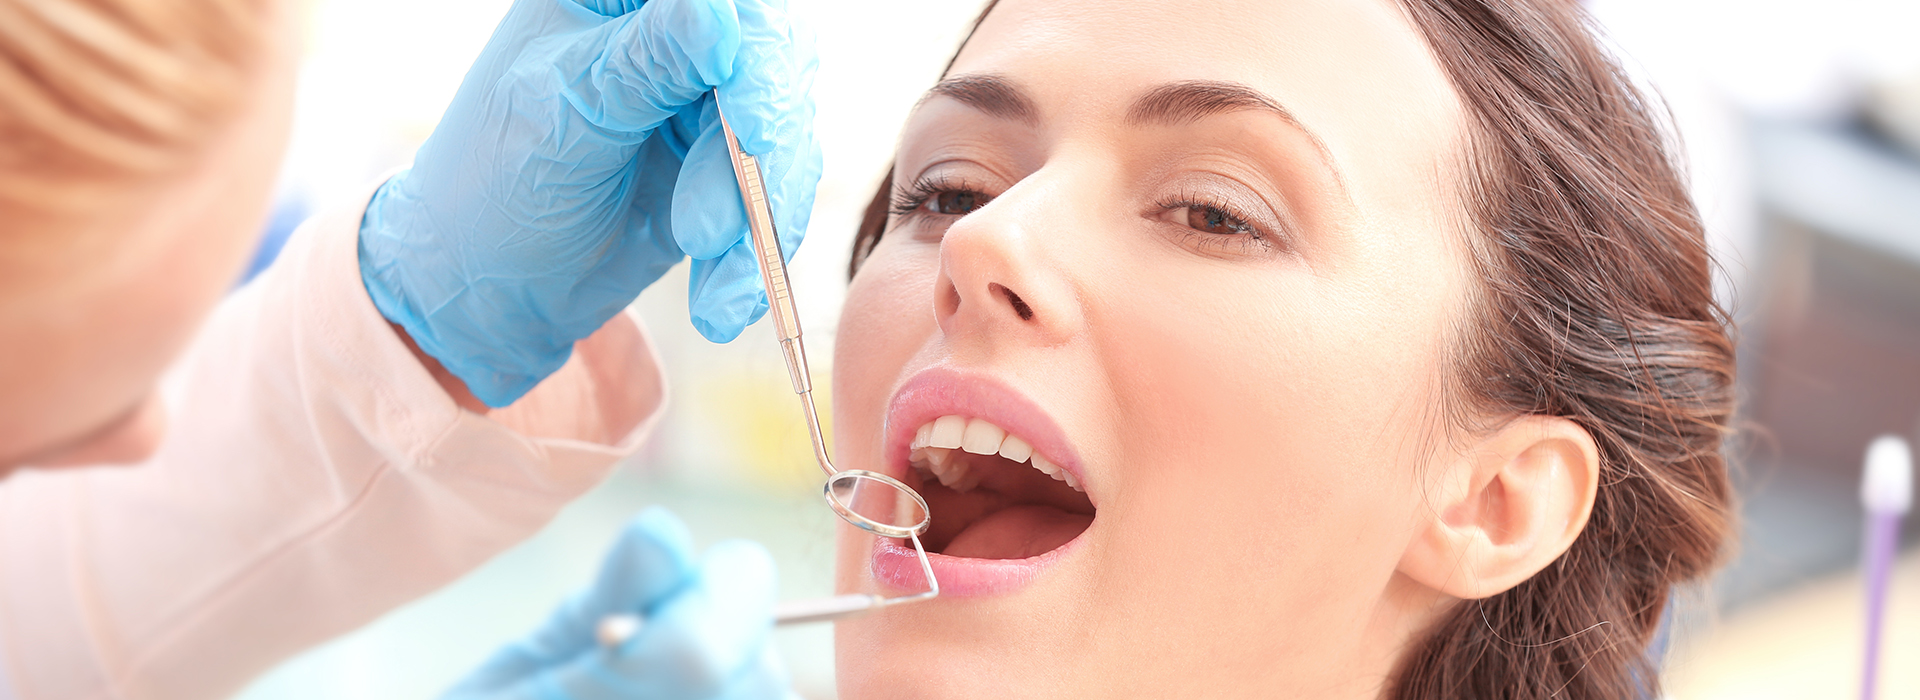 Aberdeen Family Dentistry | Periodontal Treatment, VELscope reg  Cancer Screening and Oral Exams